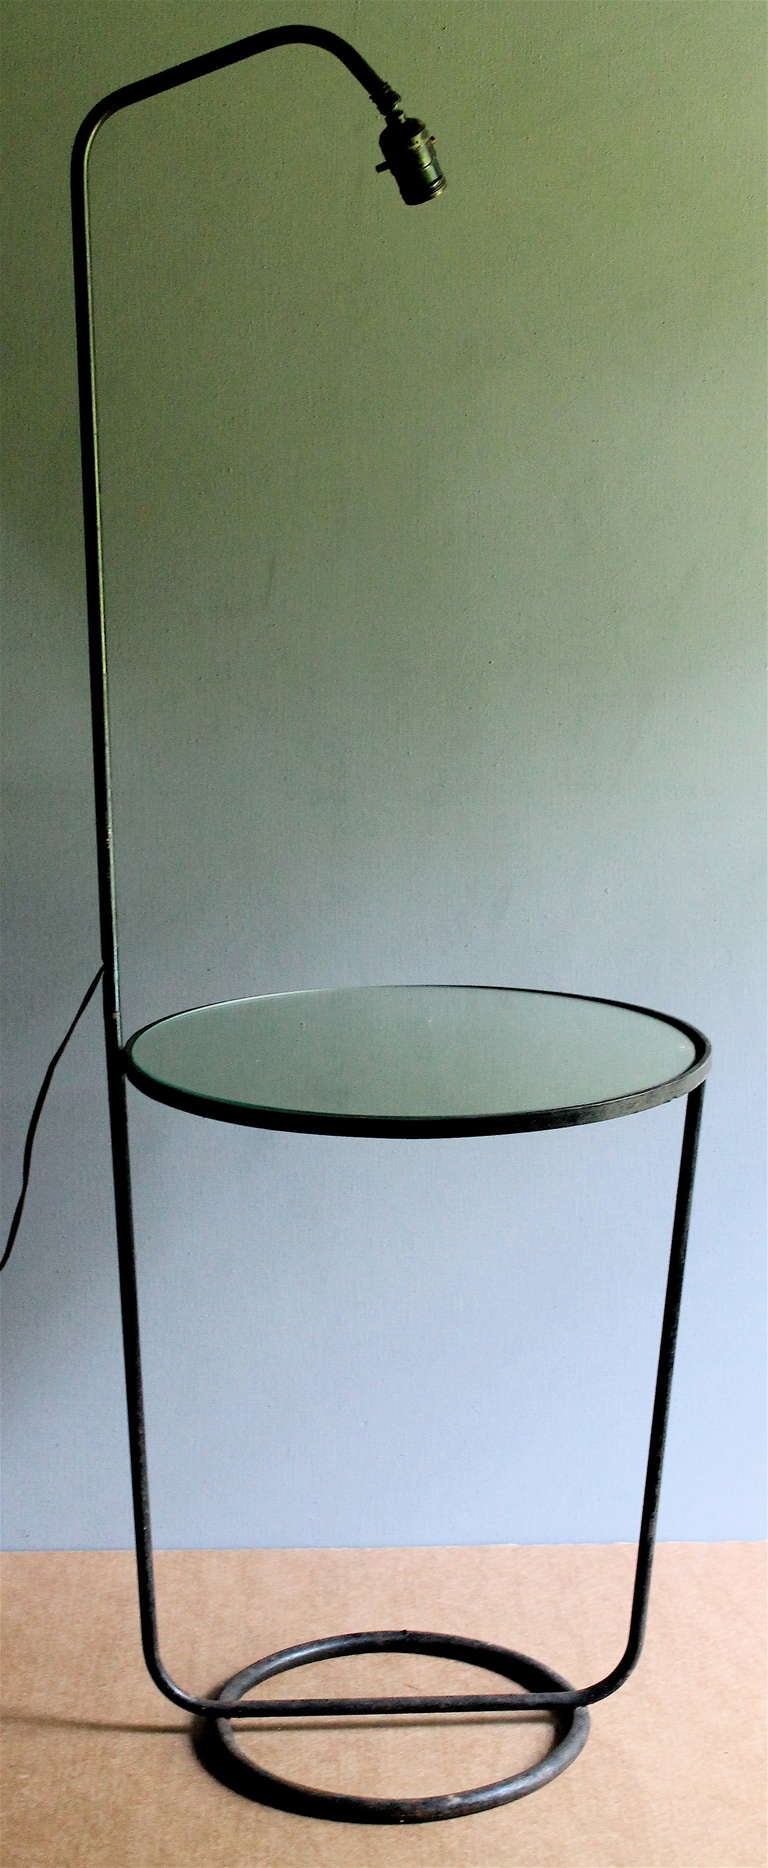 A combination floor lamp and a round mirror surfaced side table.  Original black paint.  No shade. The vertical tube detaches just below the wires exit hole.  Appears to be old if not original wiring.